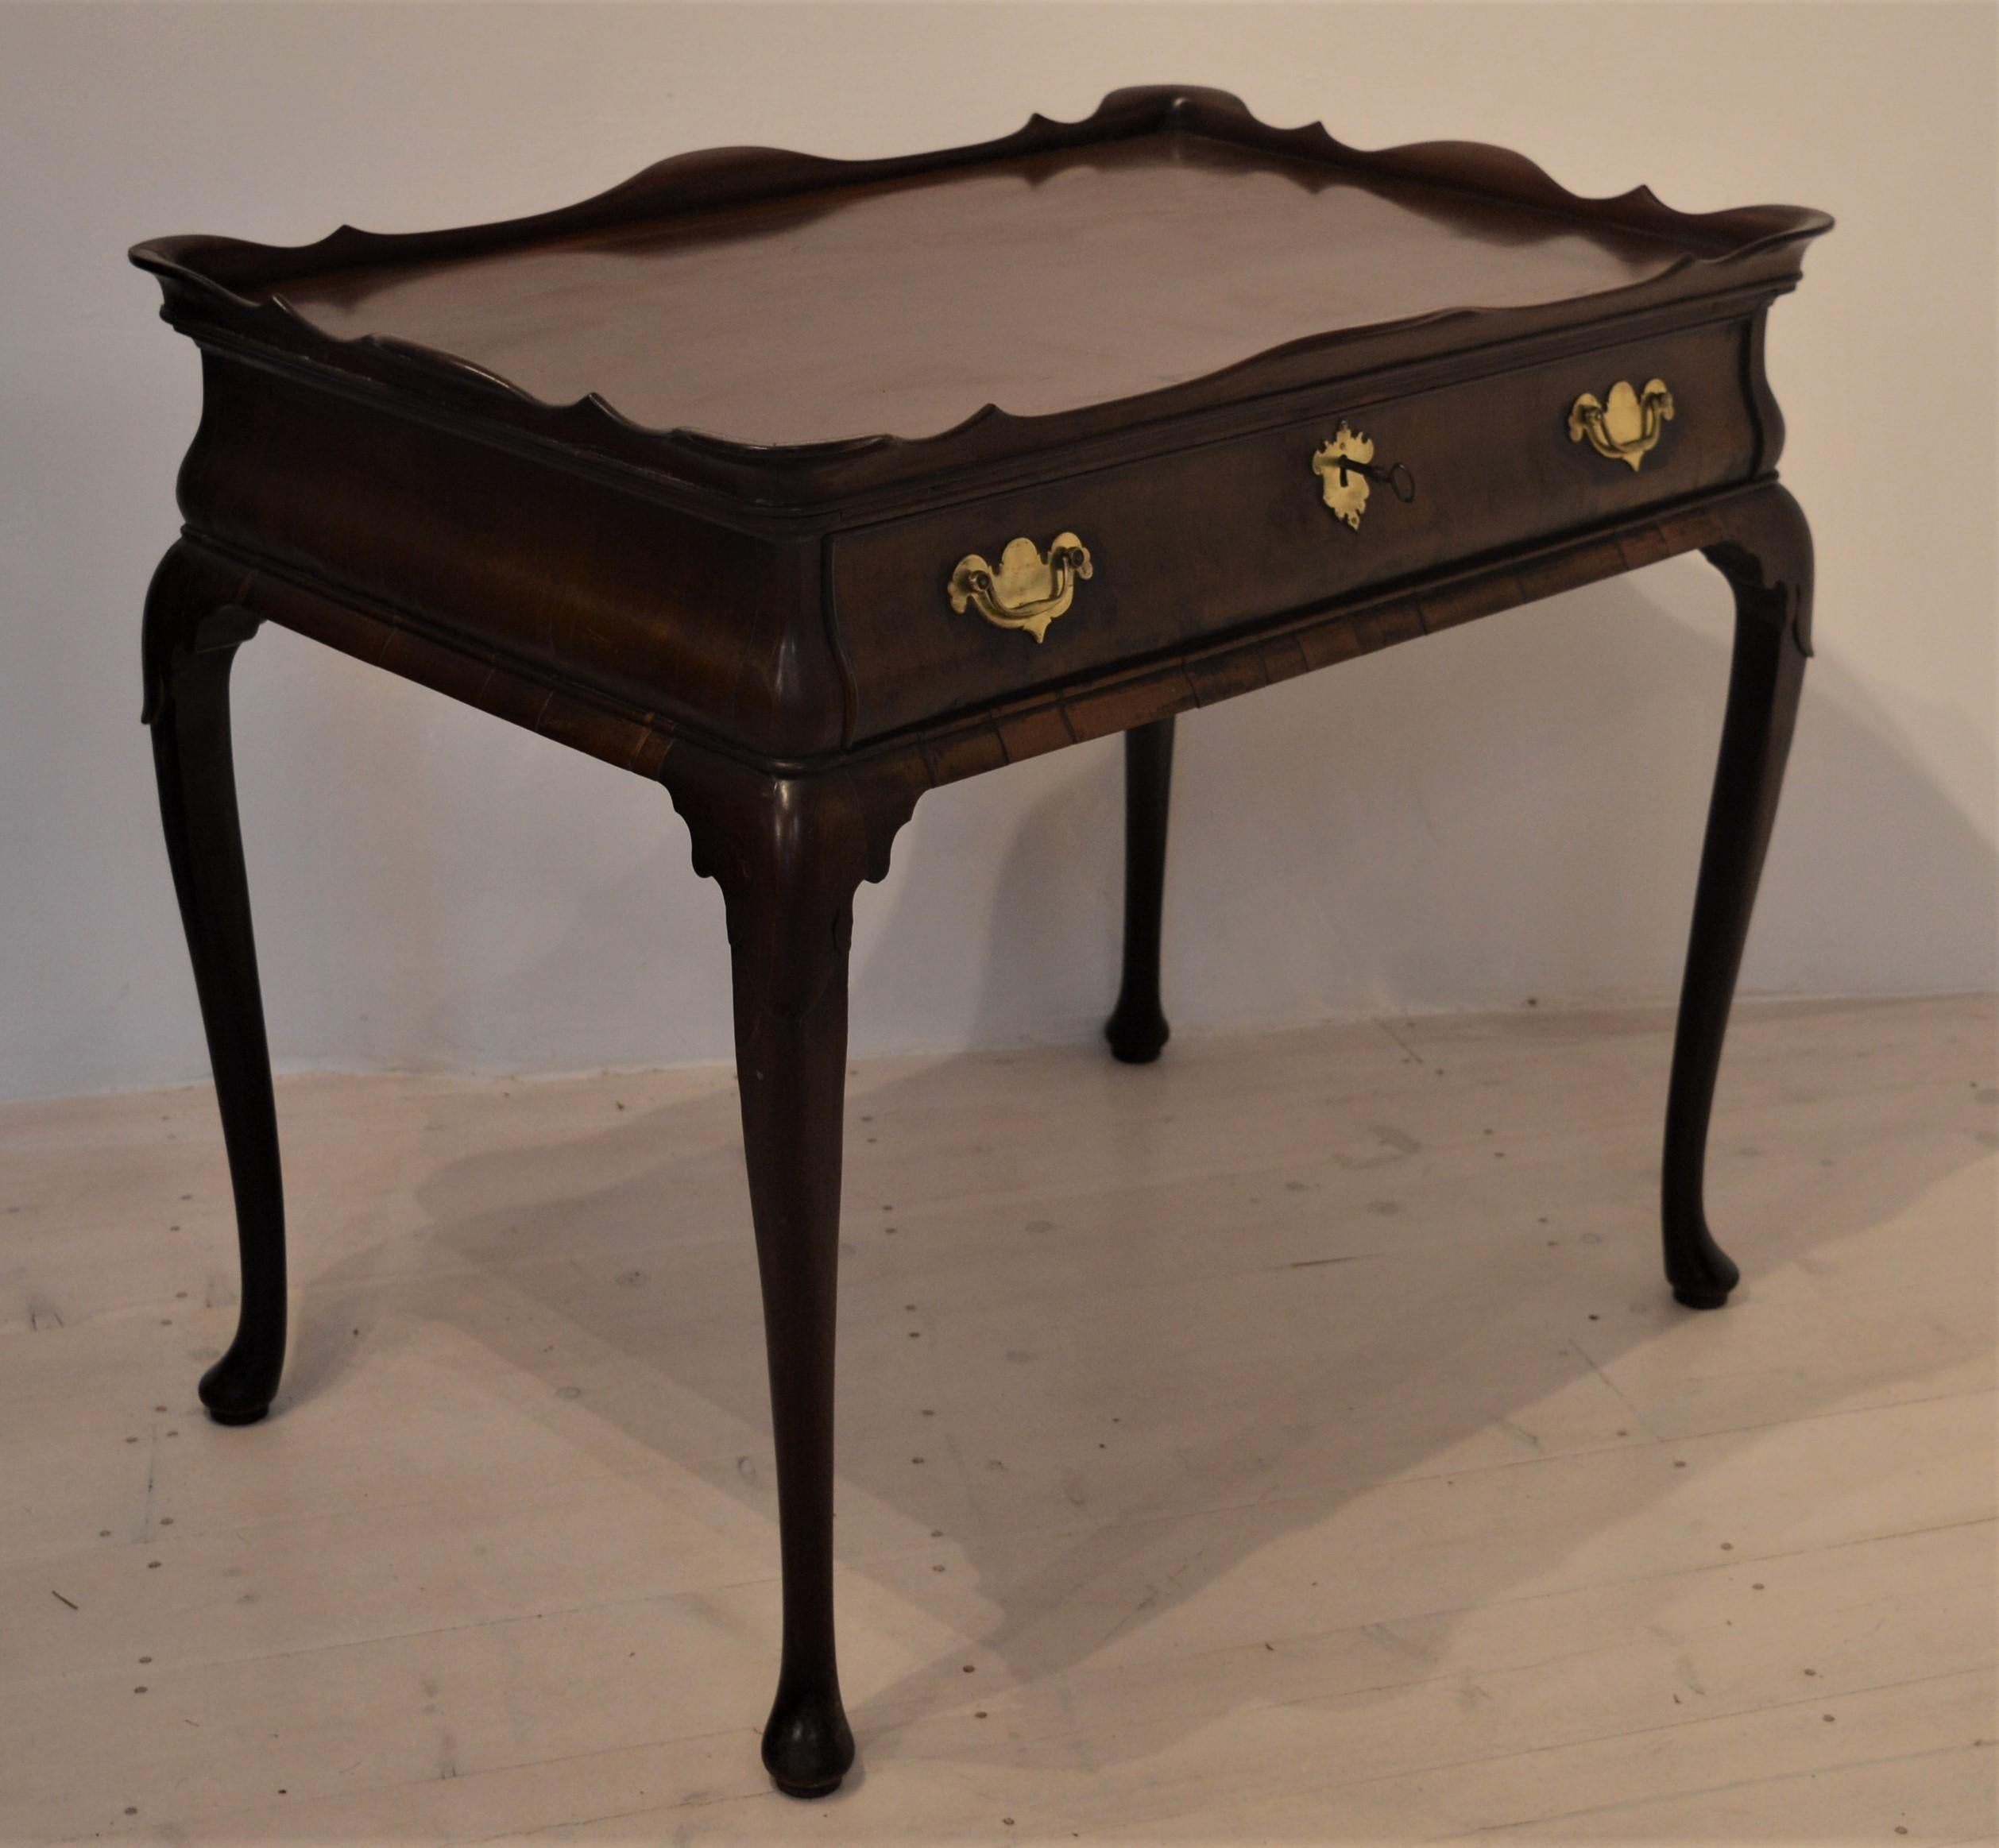 Superb 18th century mahogany side table with raised and decorated frieze which identifies it as an original Georgian tea table. This elegant piece of furniture has tear drop cabriole legs all around and a finished back so that it can be centre